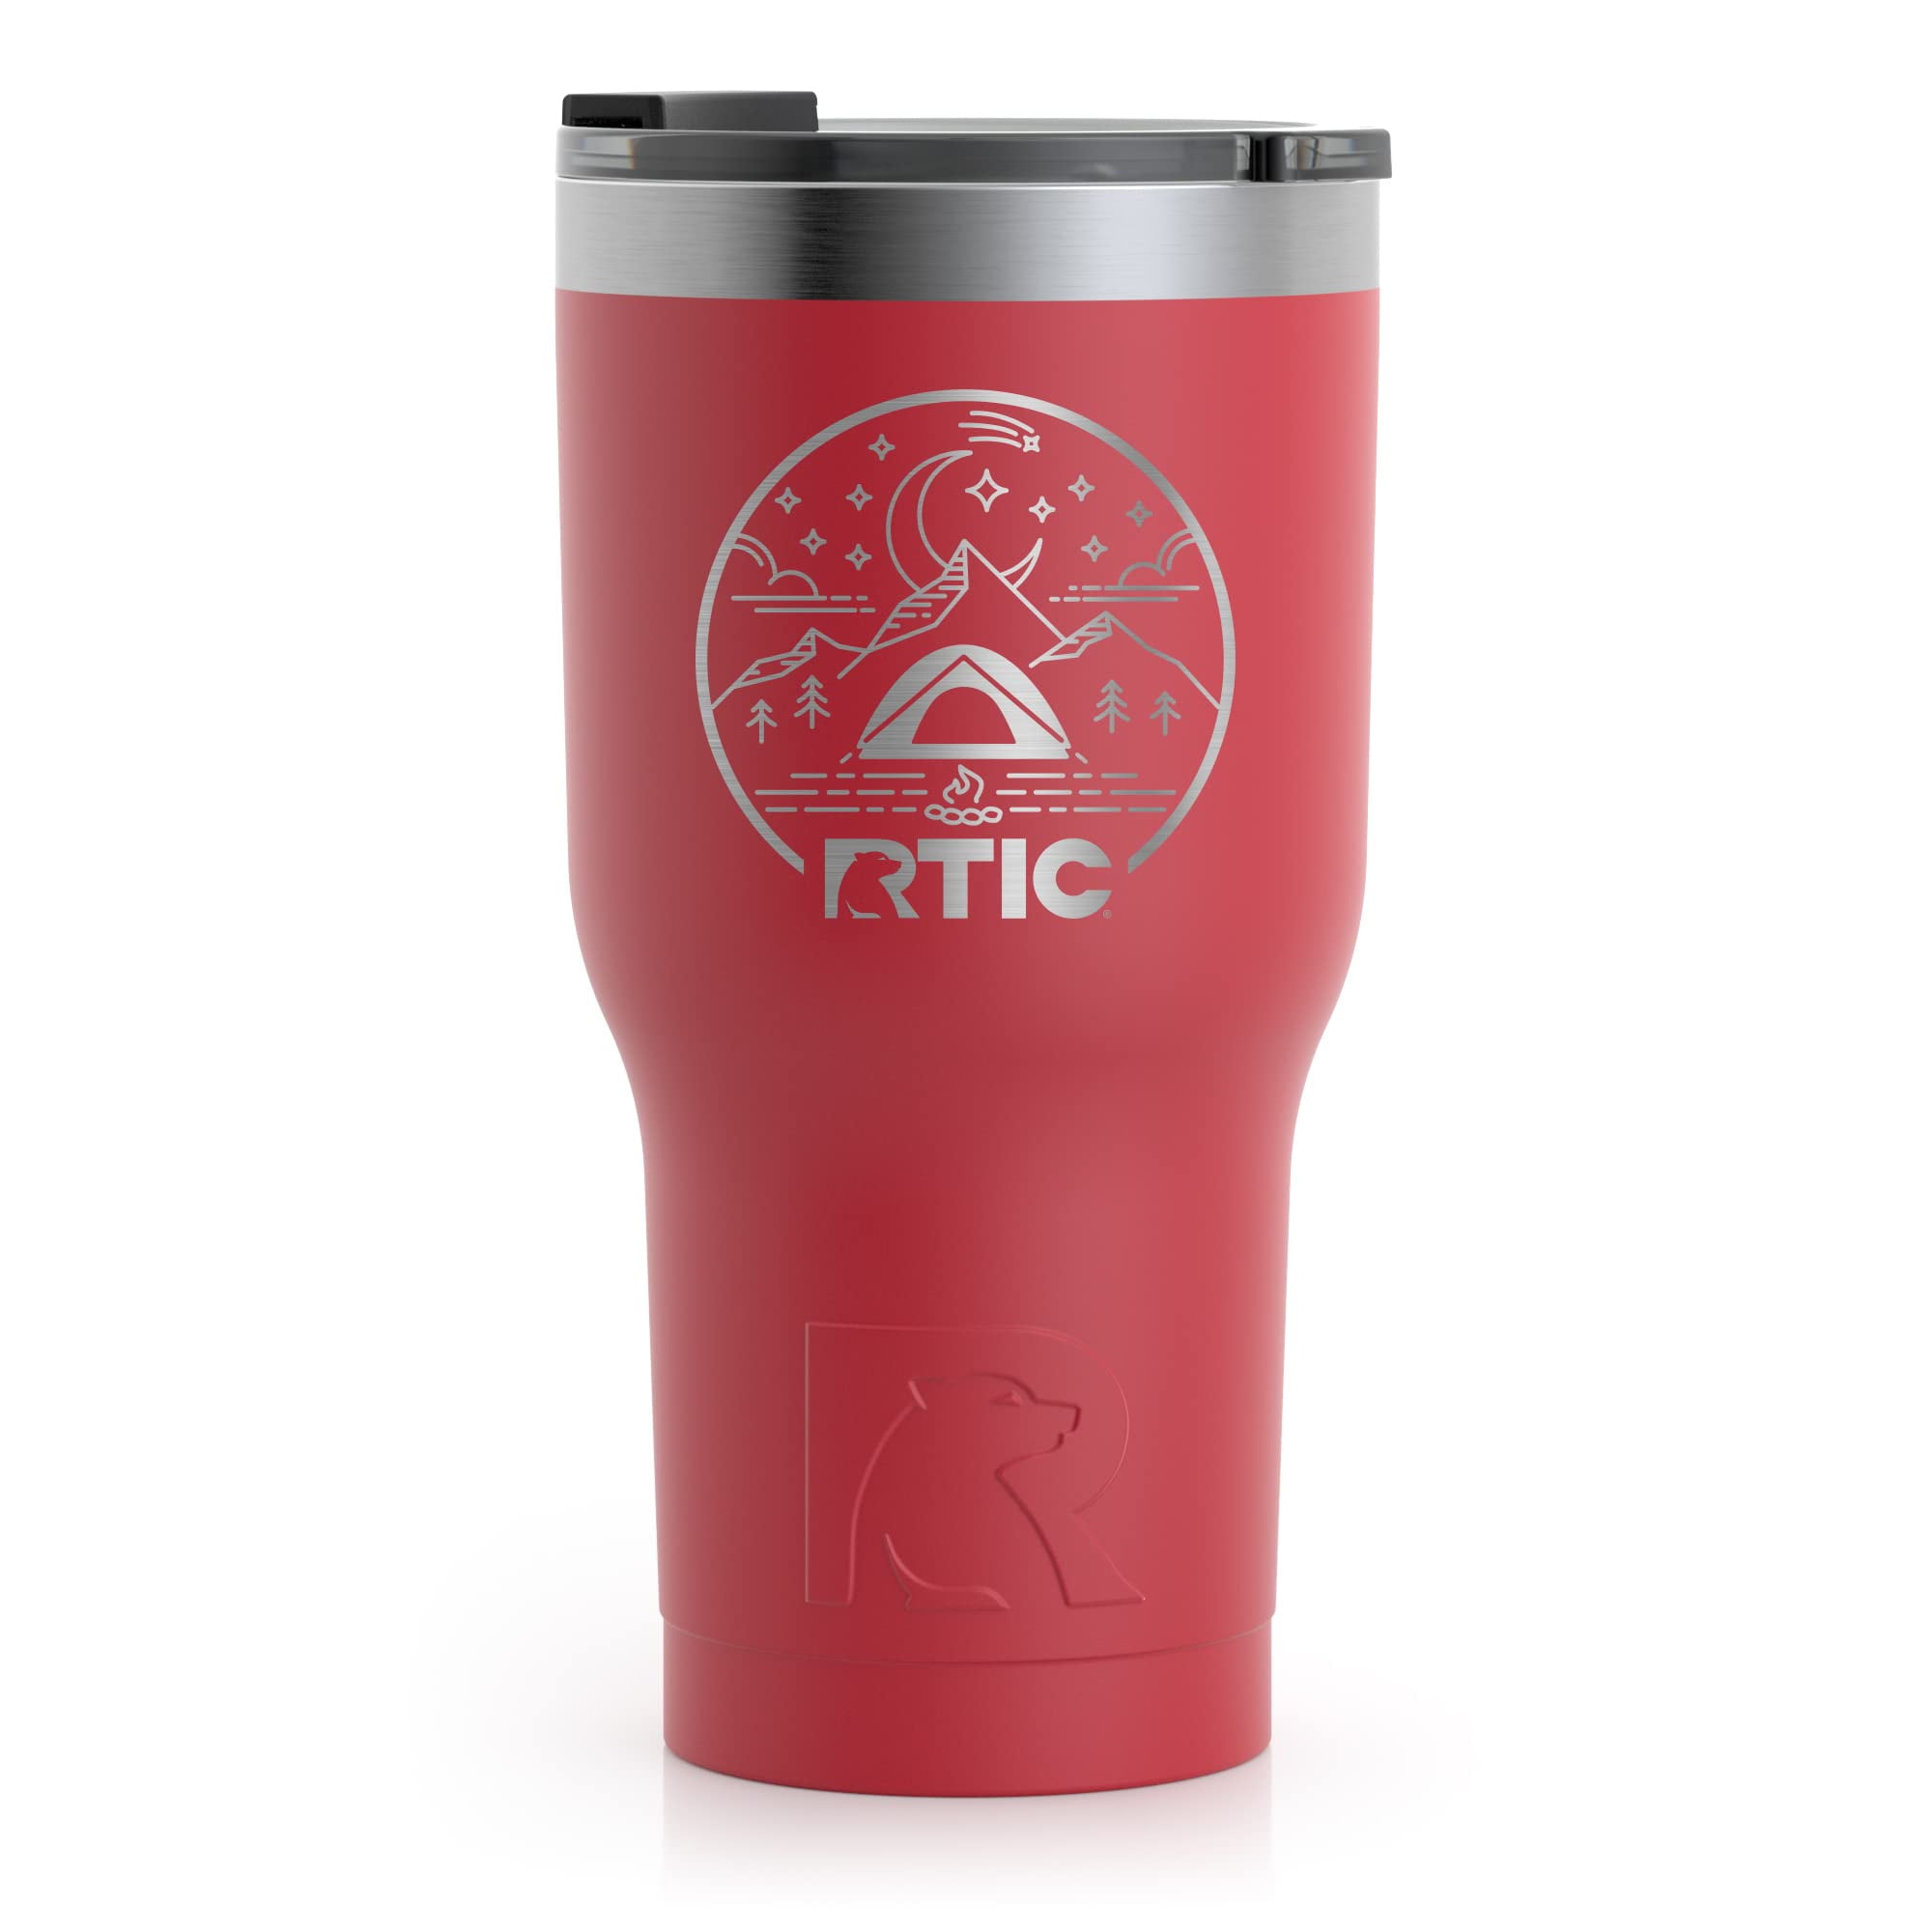 Heritage Pewter Ohio State 15 oz. Tumbler - Red | Durable Insulated Tumbler Cup for Cold & Hot Drinks | Thermal Travel Mug for Coffee | Intricately